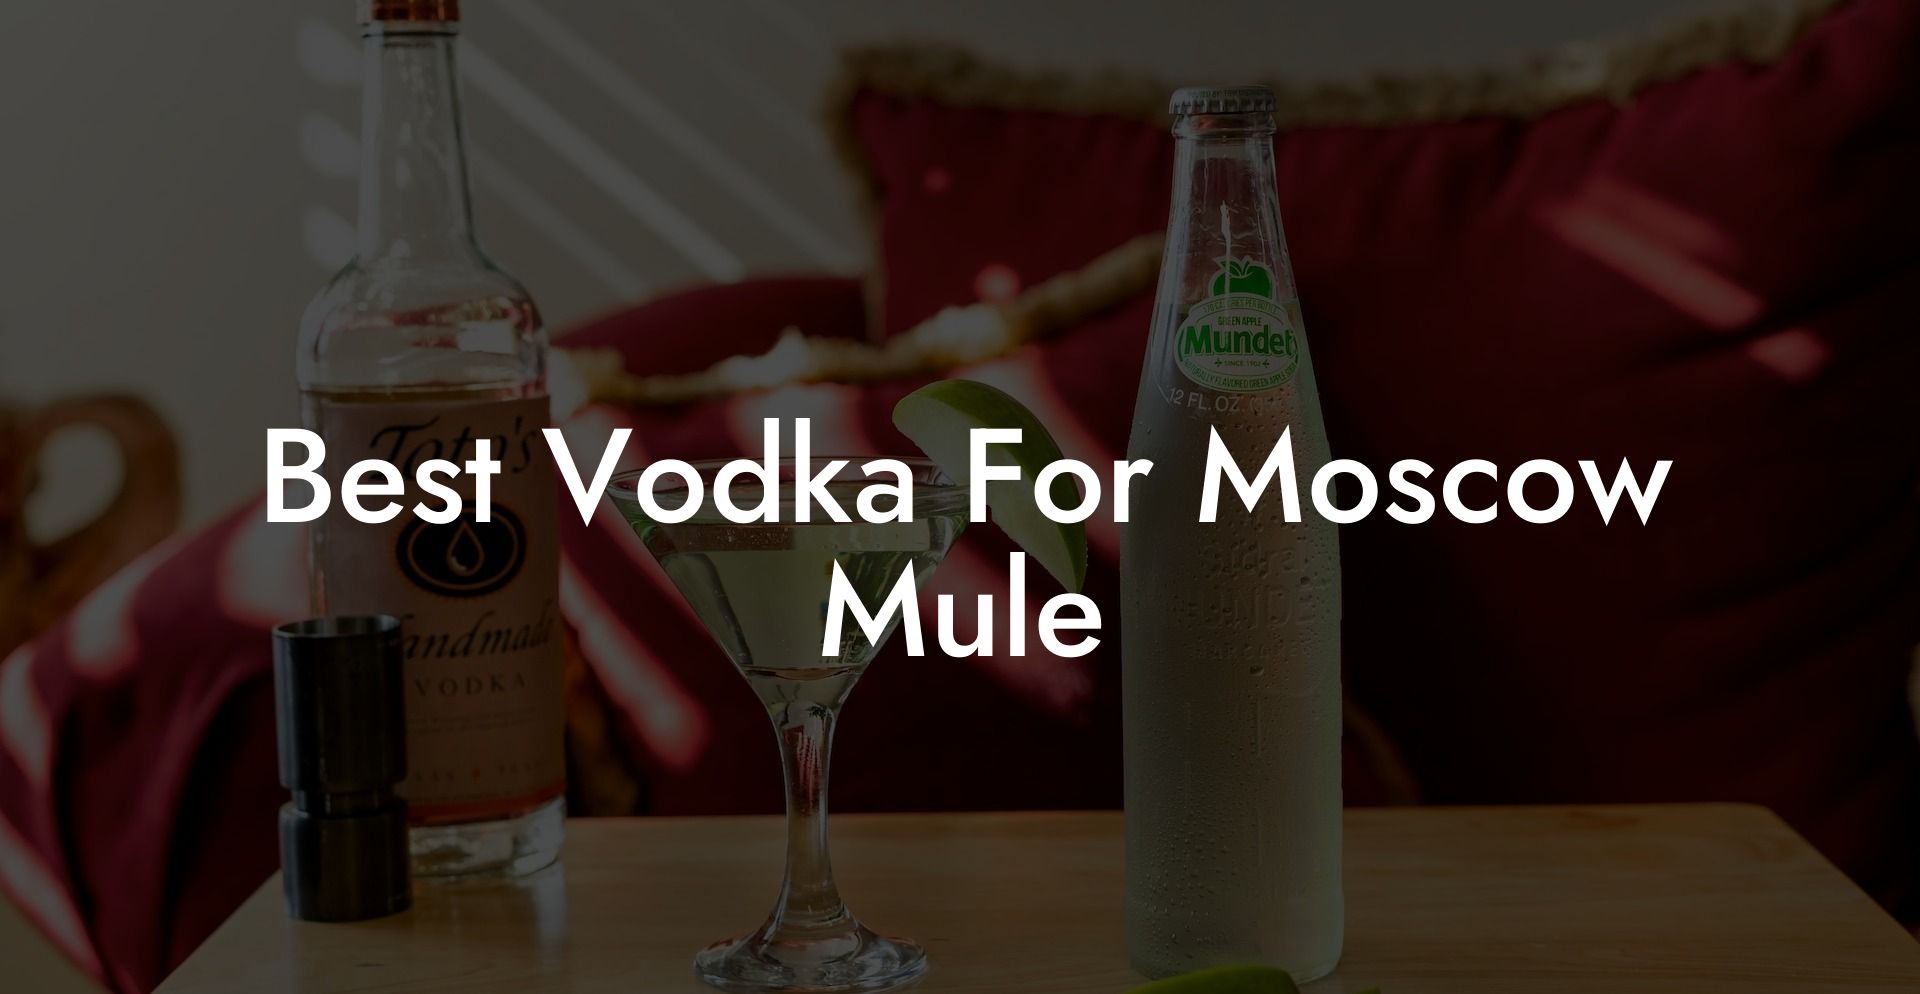 Best Vodka For Moscow Mule